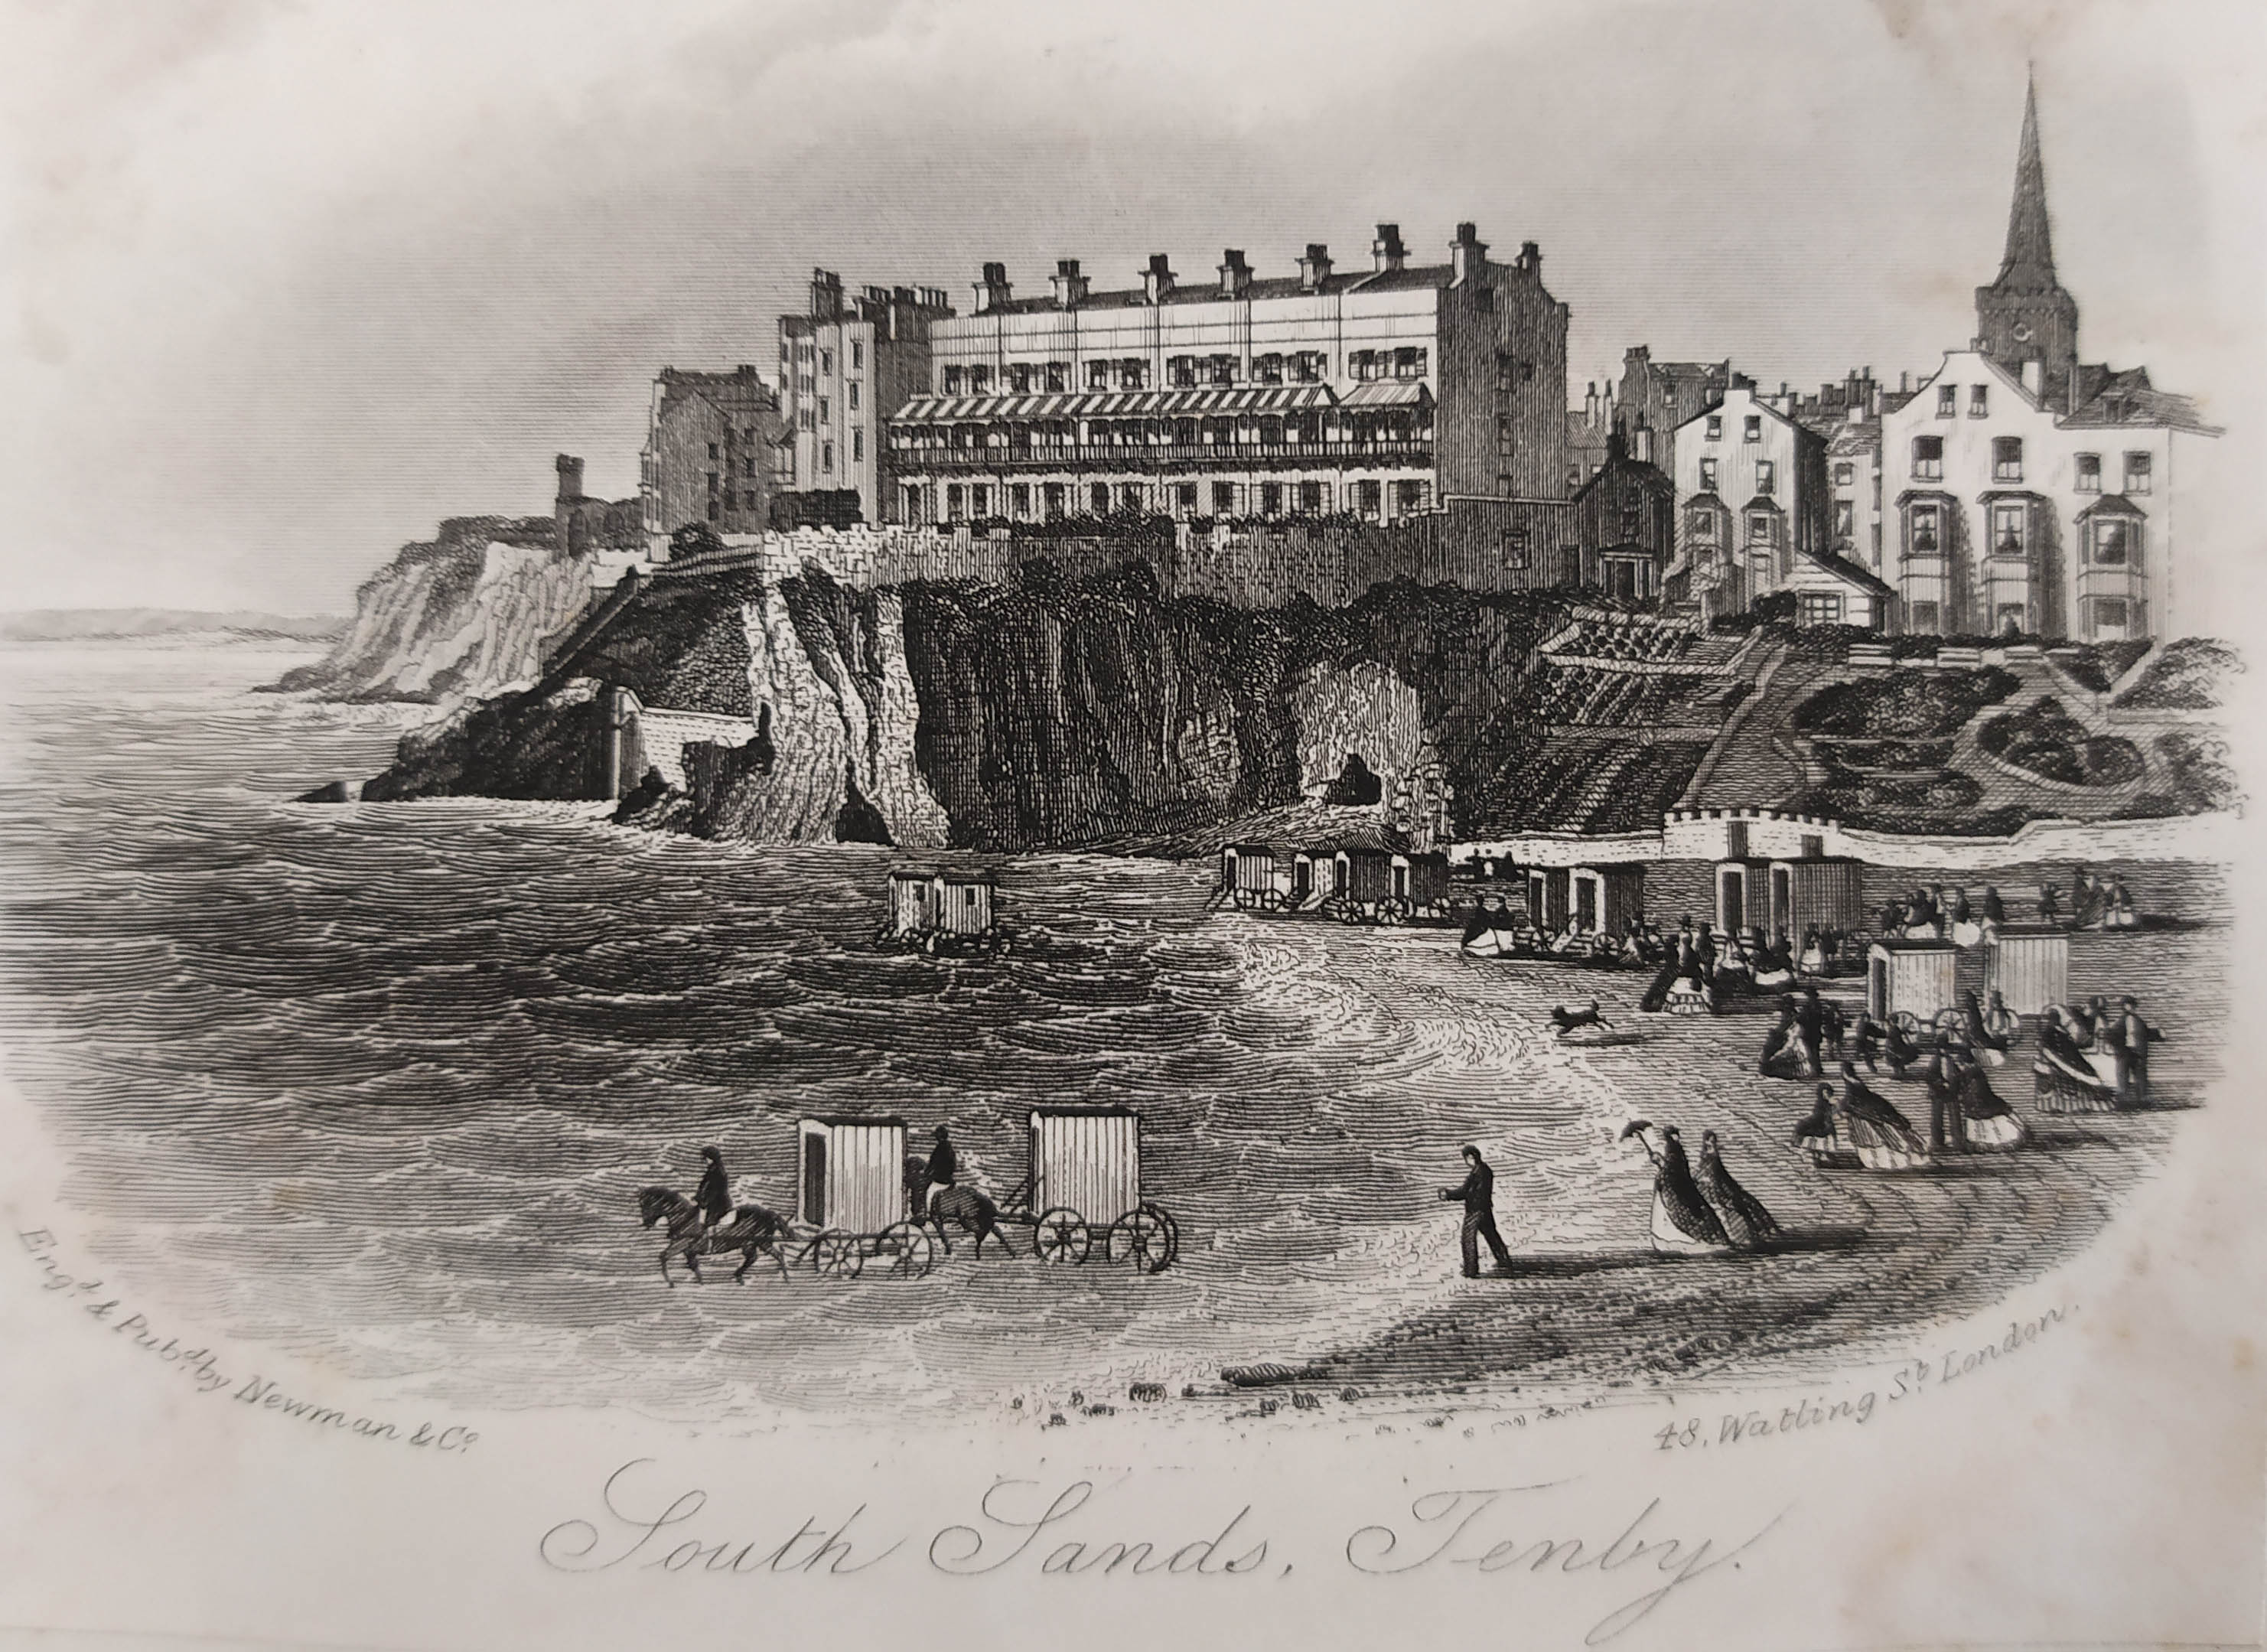 Tenby 1800-1900  Early Tourists in Wales